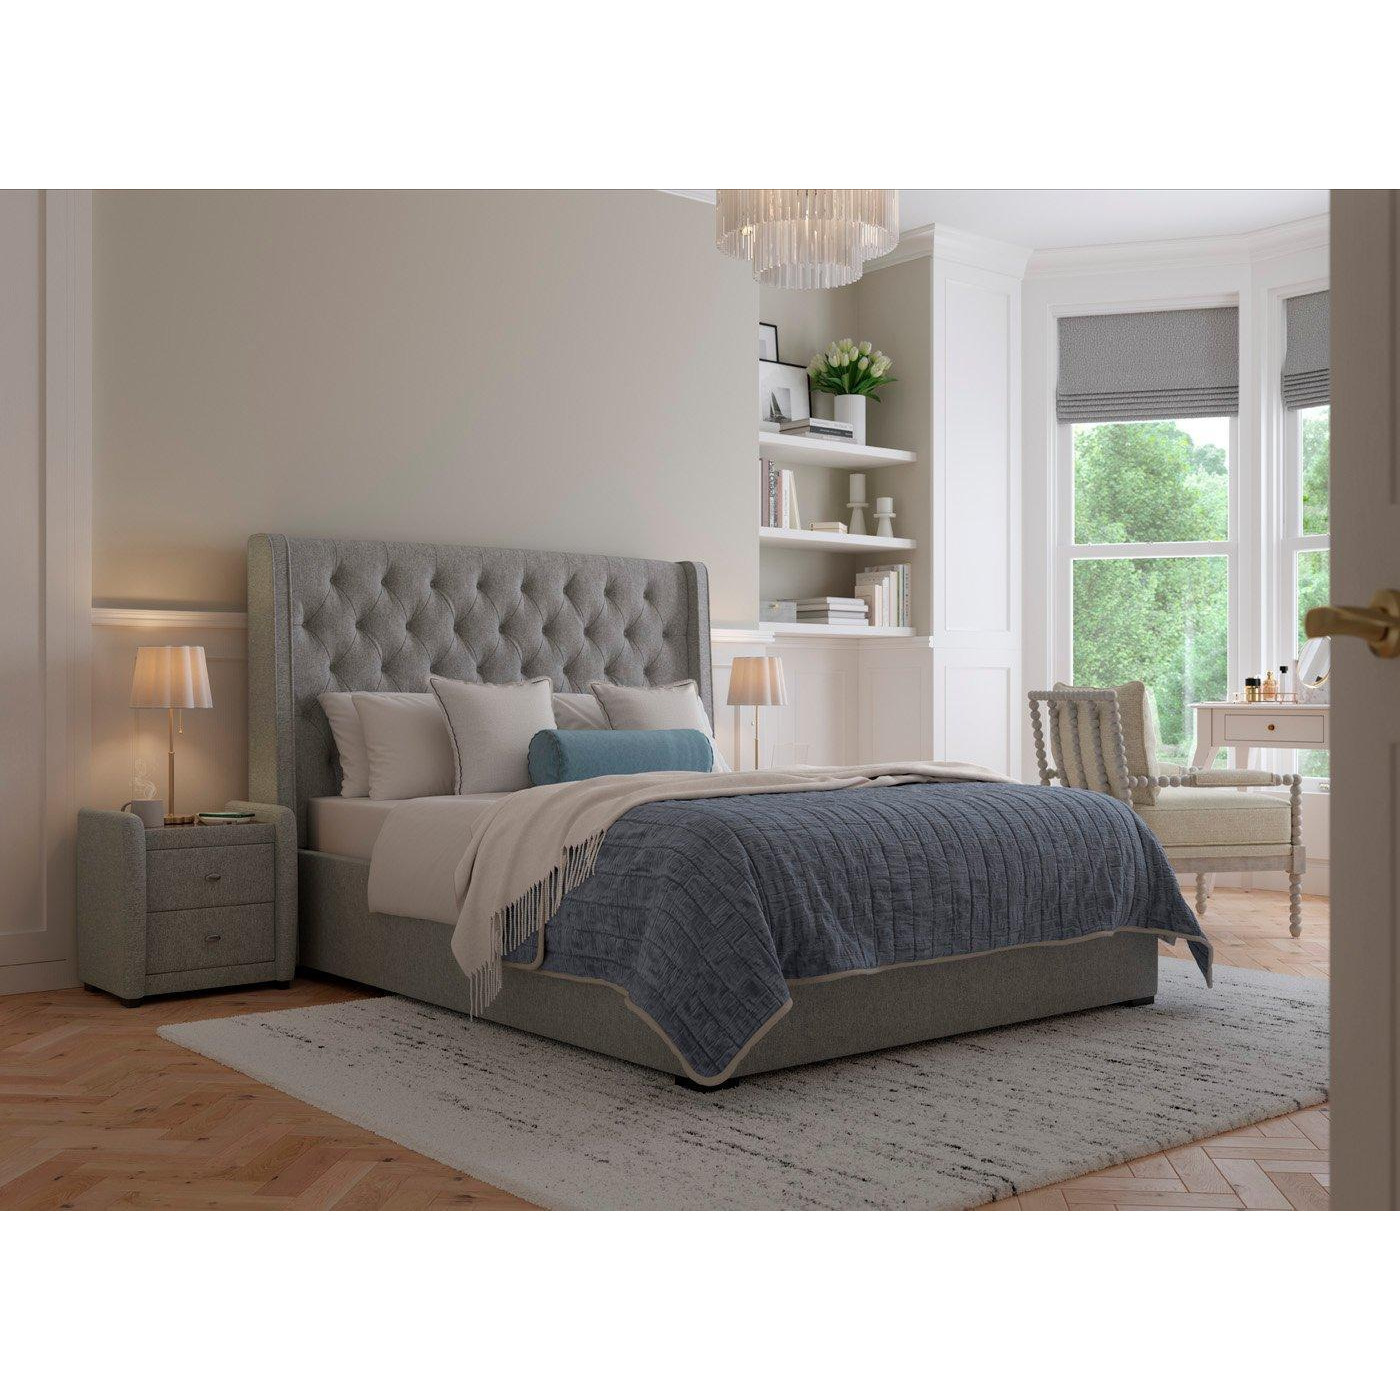 Deacon Upholstered Bed Frame - 4'6 Double - Grey